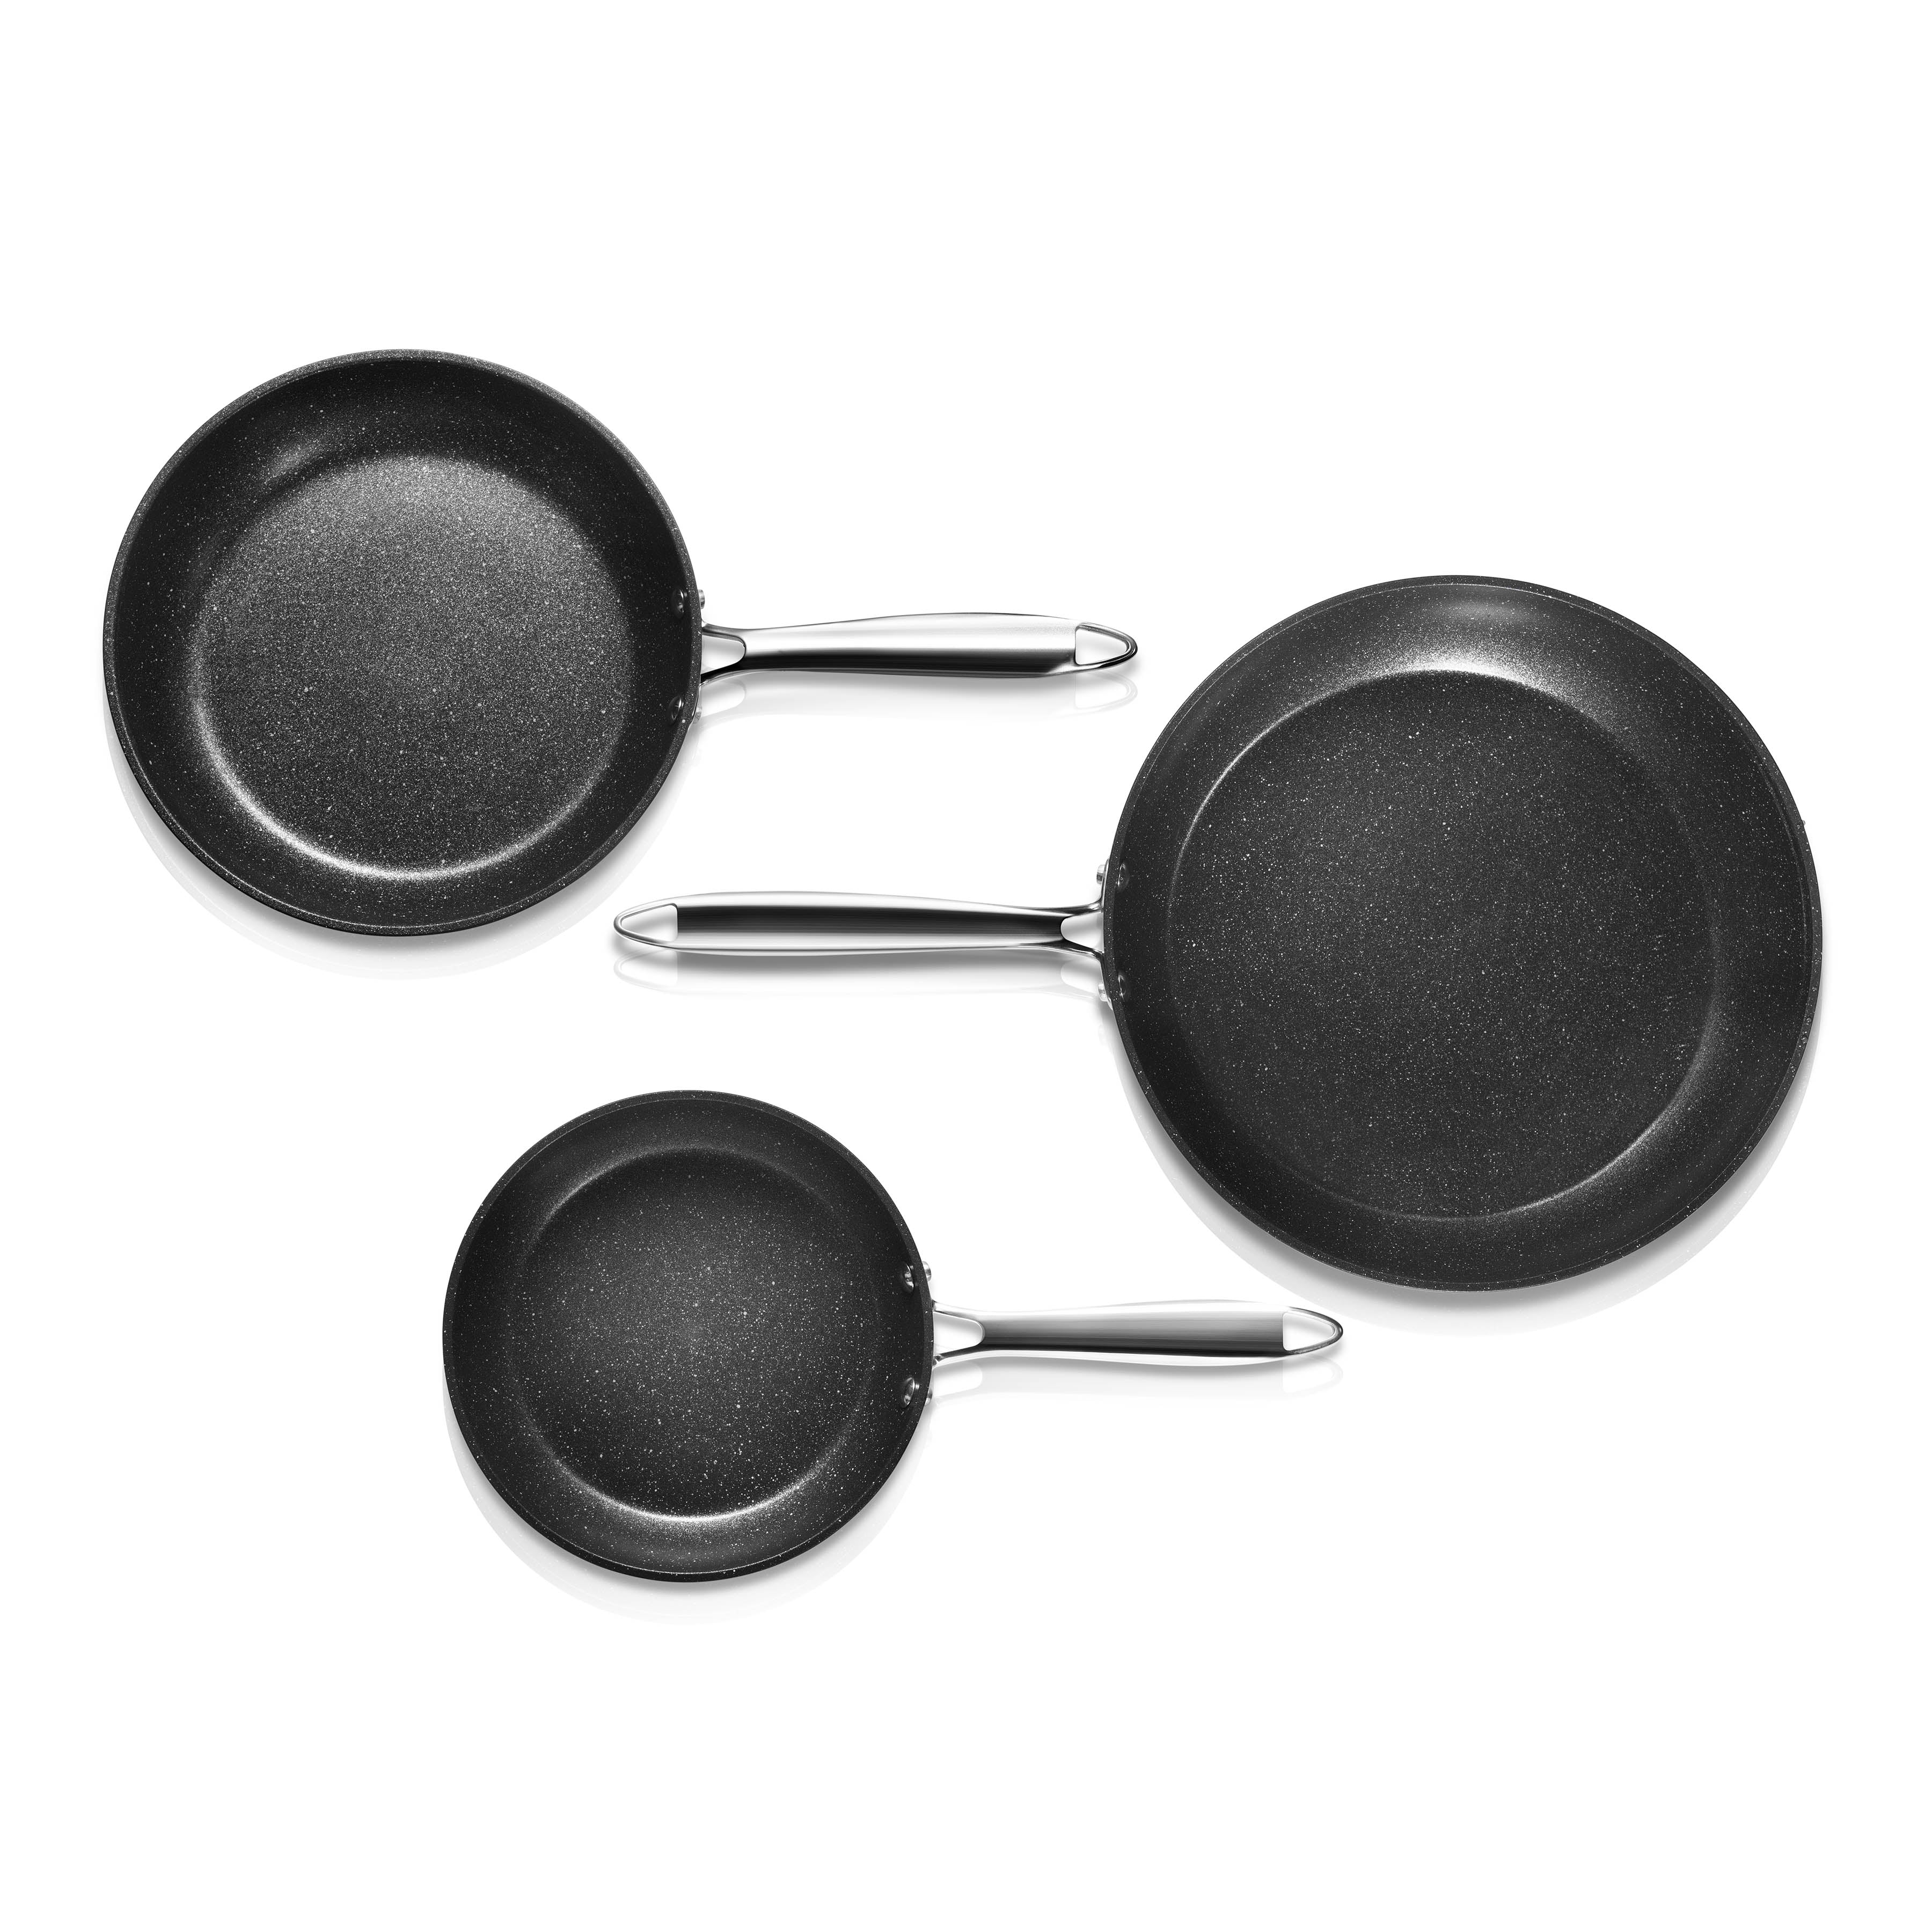 MR. CAPTAIN Nonstick Frying Pan Skillet Set 3-Piece-8 Inch,10 Inch and 12  Inch. Stainless Steel Stone-Derived Non-Stick Granite Coating From The US